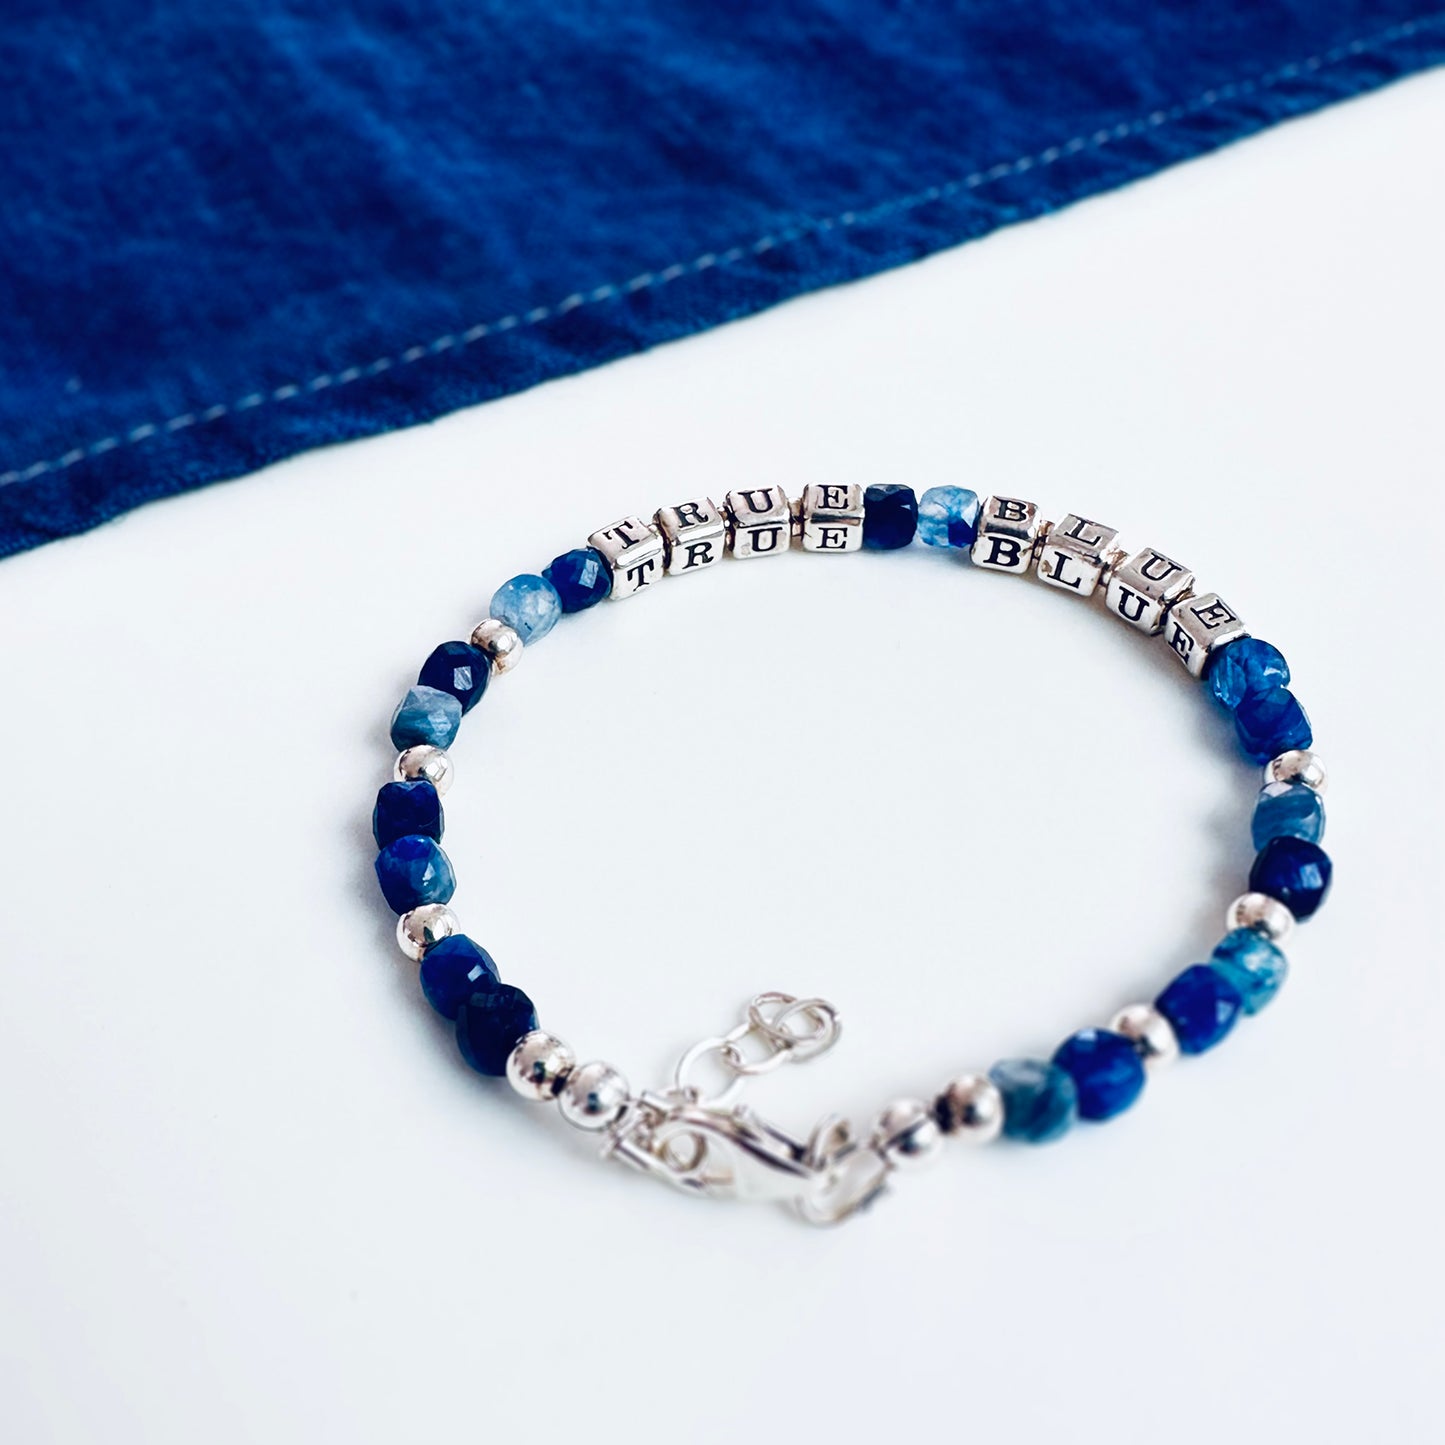 True Blue Bridal Party Friendship Sterling Silver Engraved Message Bracelet with Blue Kyanite and Lapis Beads